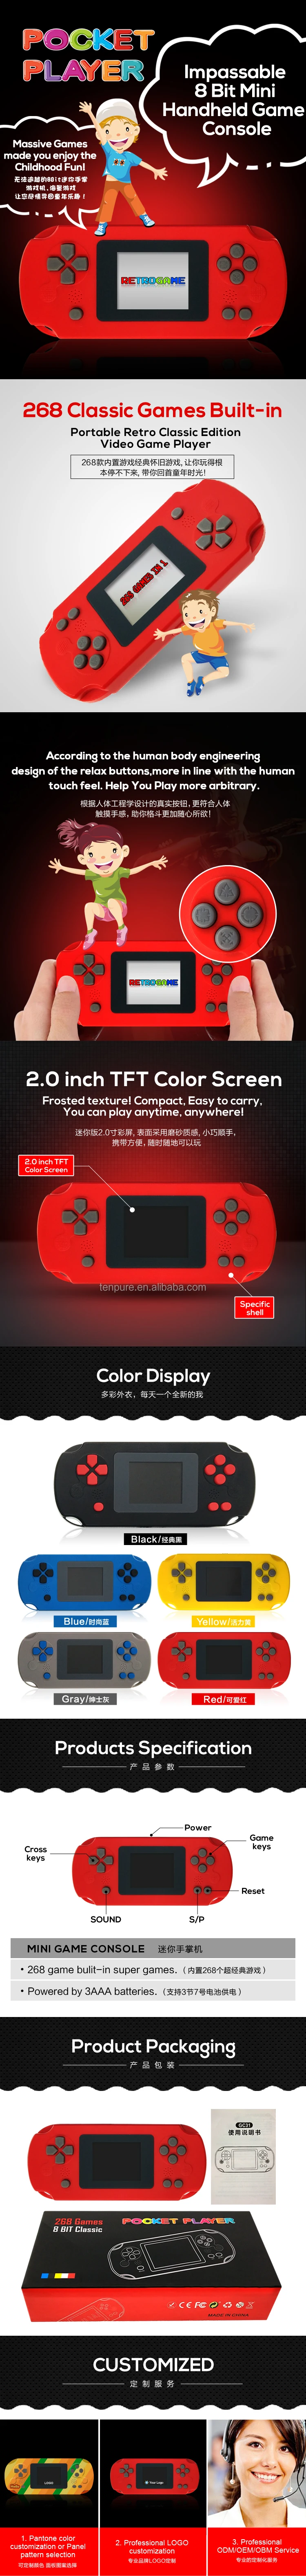 Portable Classic 8 bit Handheld Game Console 268 in 1 Retro Games Player For Christmas Gift Mini Game Consoles Retro Consola Pad